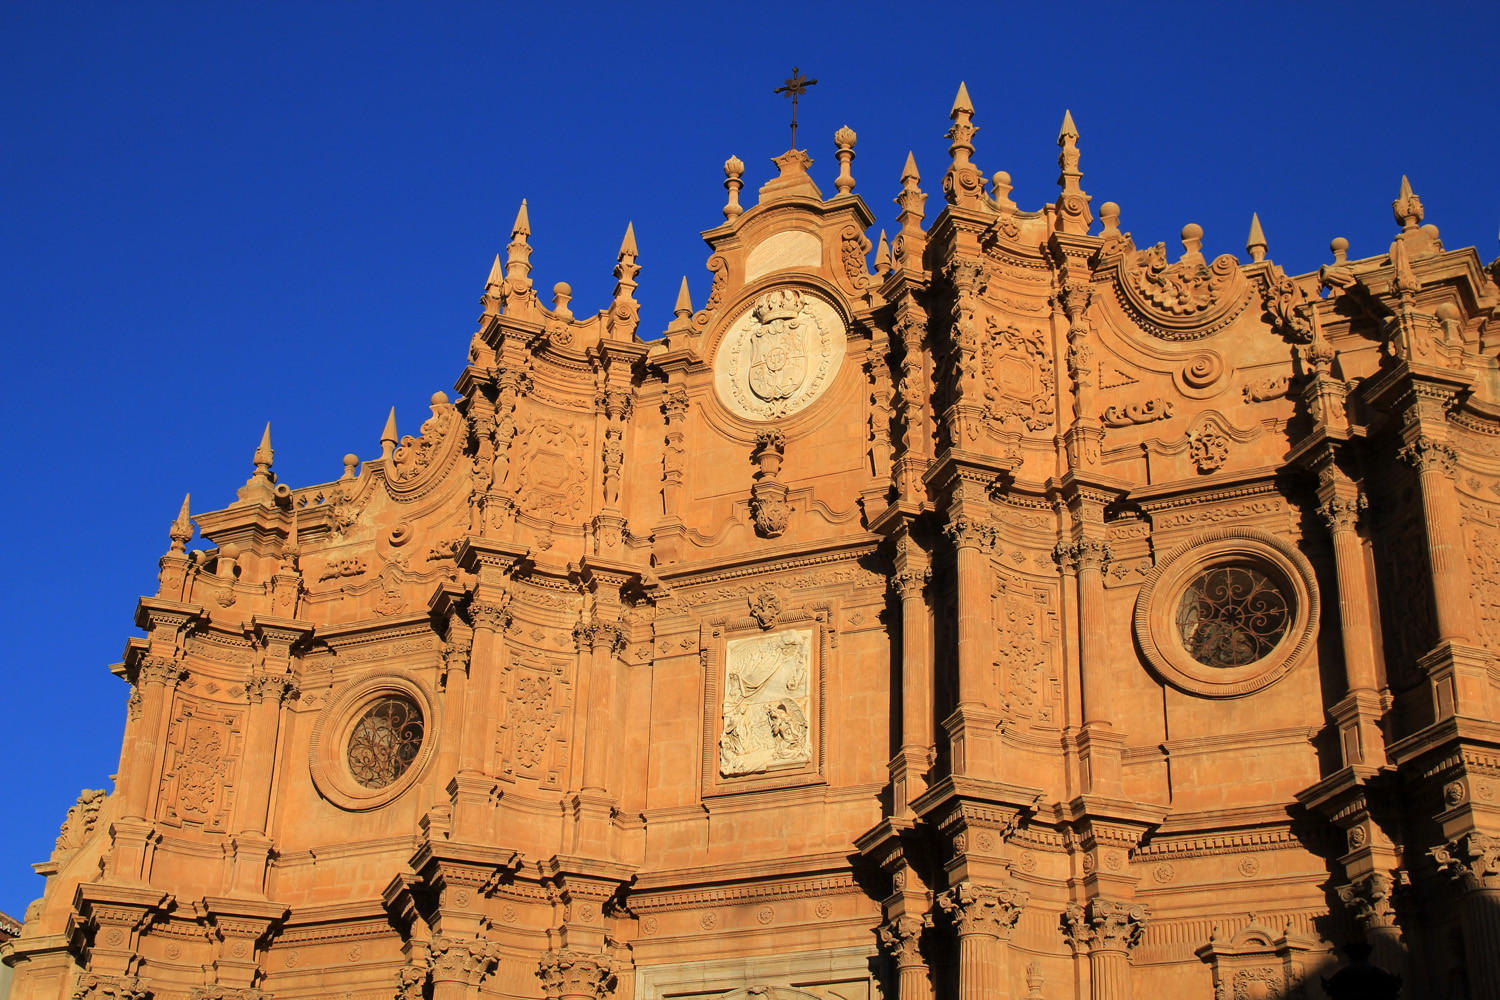 The Cathedral of Guadix